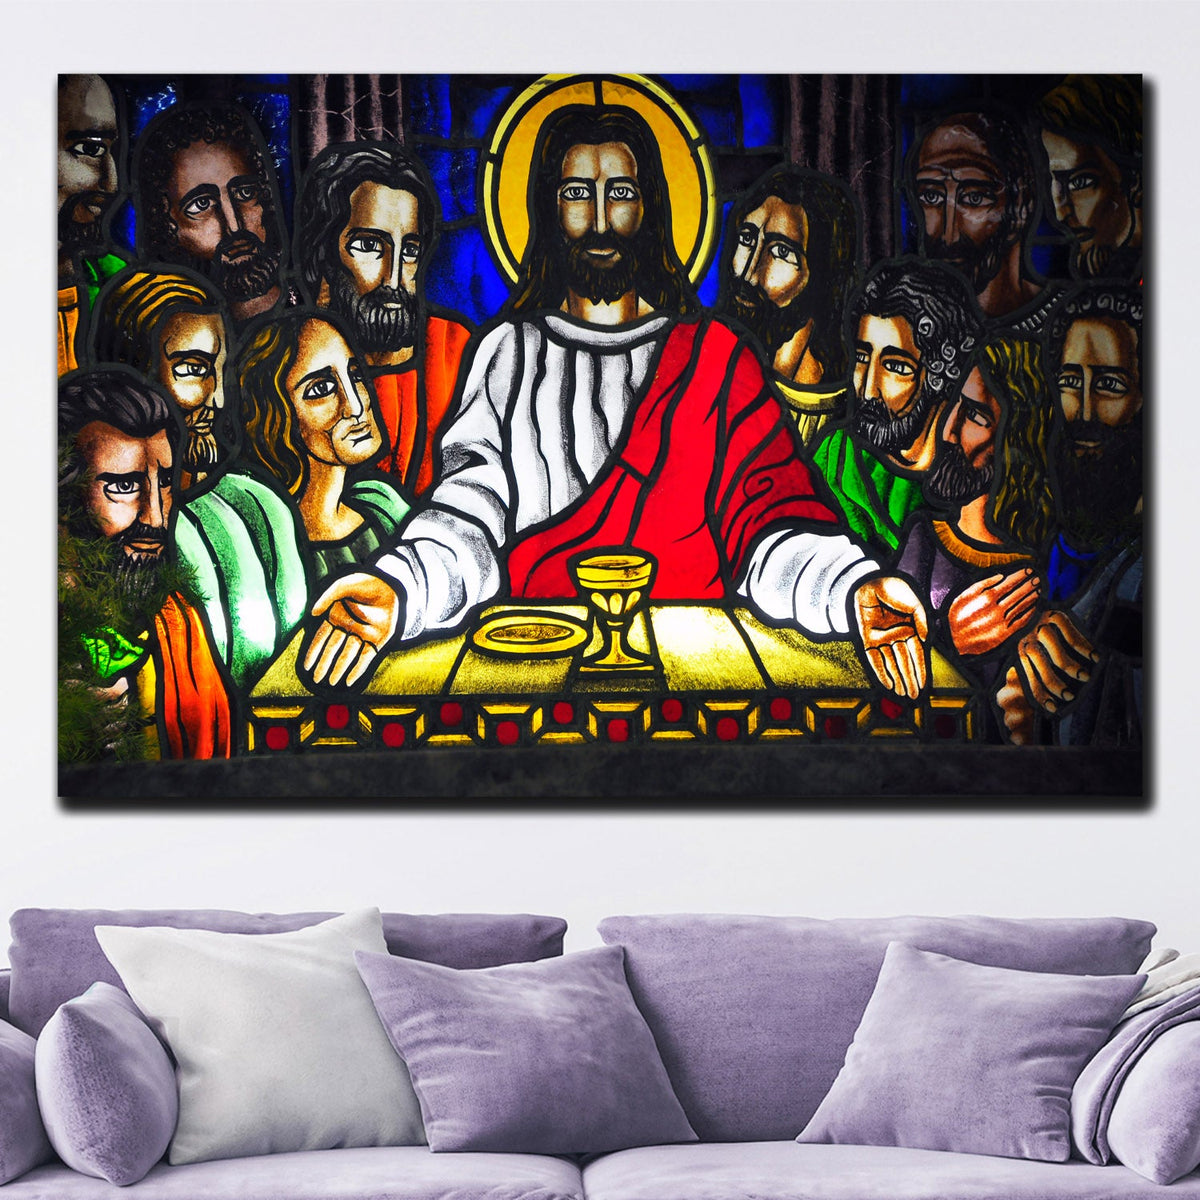 https://cdn.shopify.com/s/files/1/0387/9986/8044/products/TheLastSupperMosaicCanvasArtprintStretched-1.jpg